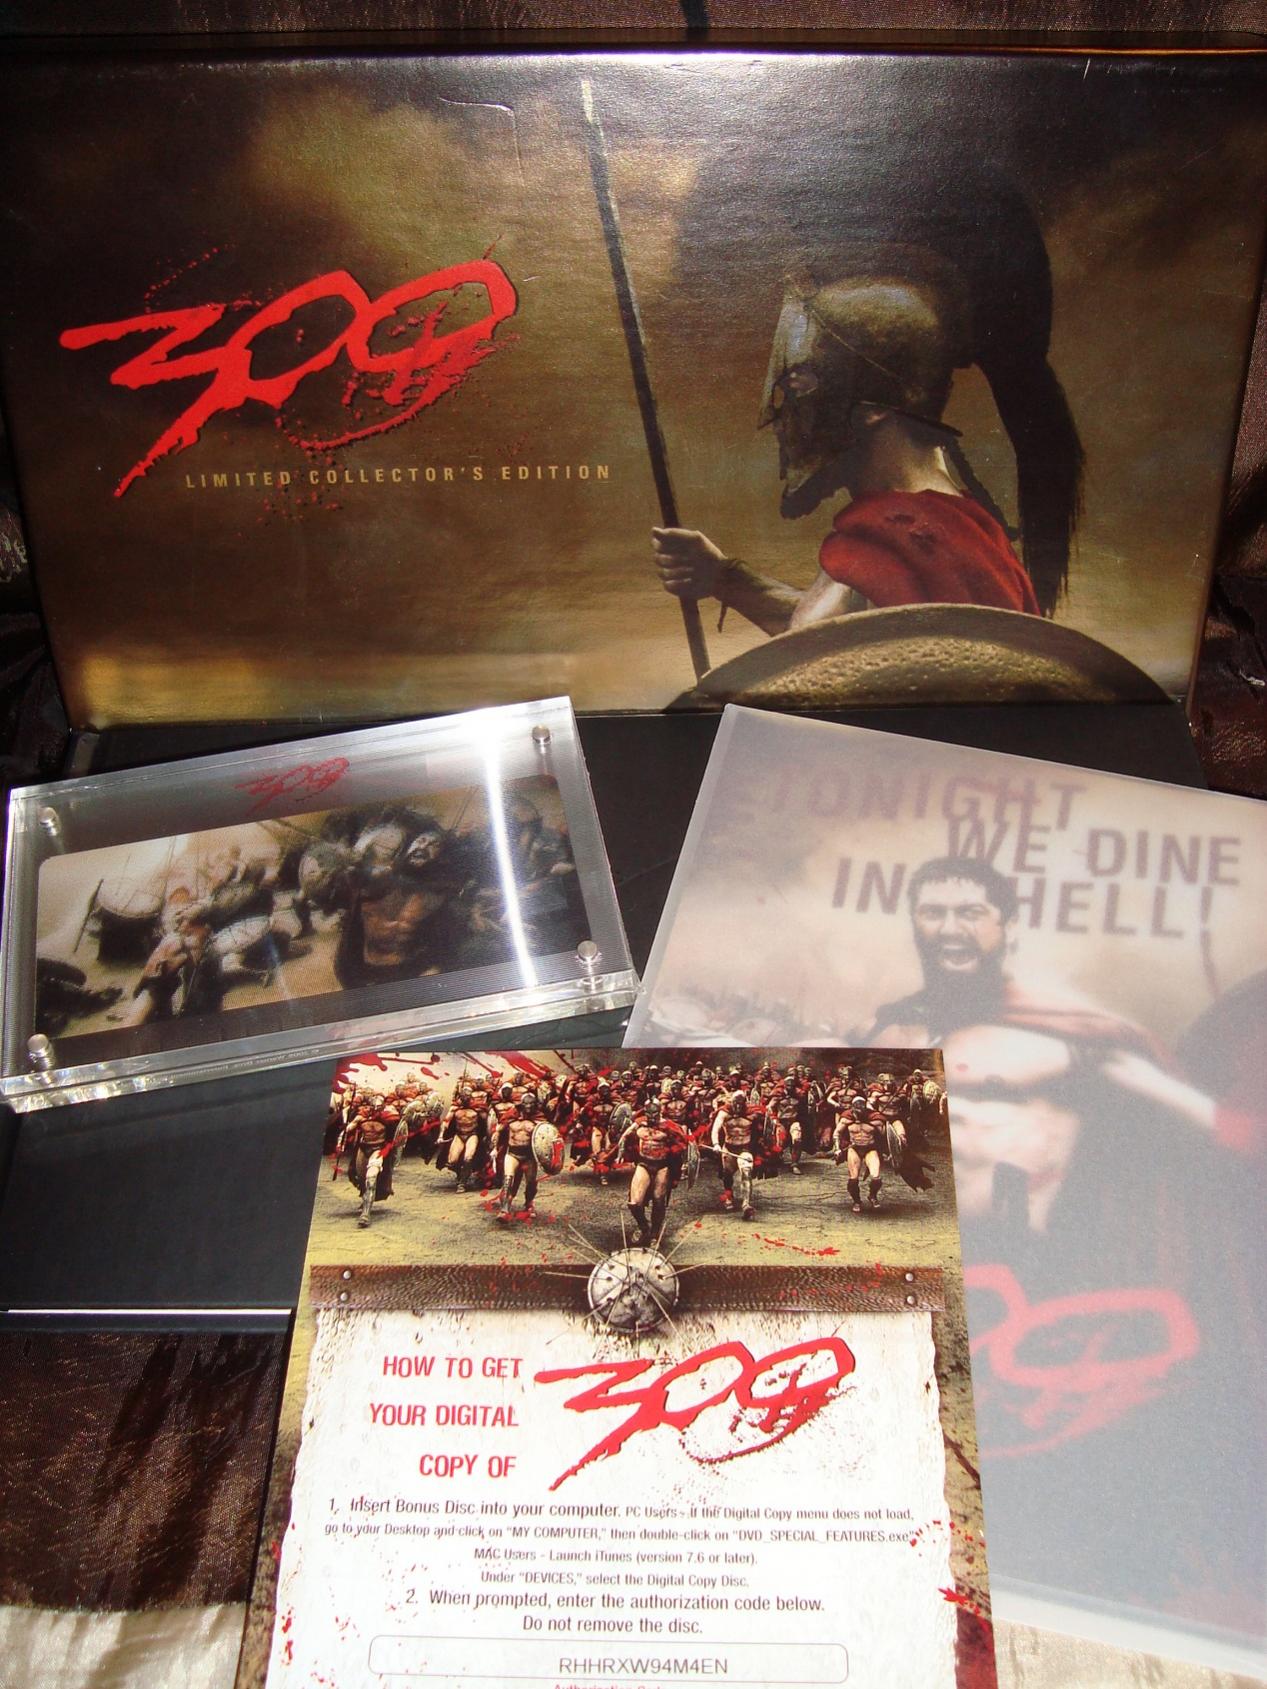 17. Limited Collectors Edition DVD 1